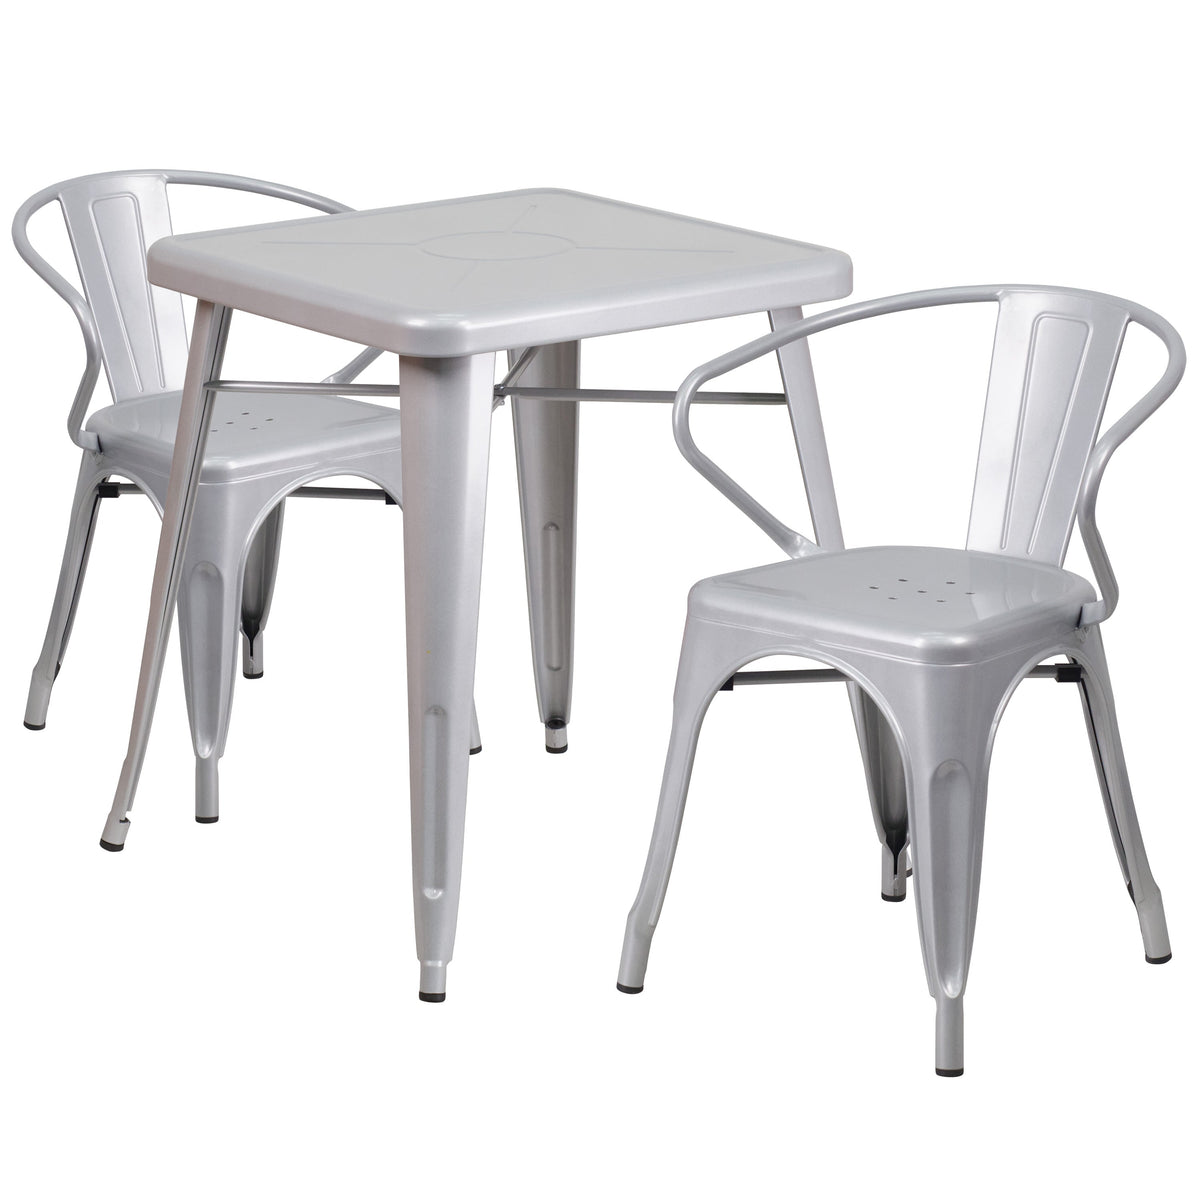 Silver |#| 23.75inch Square Silver Metal Indoor-Outdoor Table Set with 2 Arm Chairs